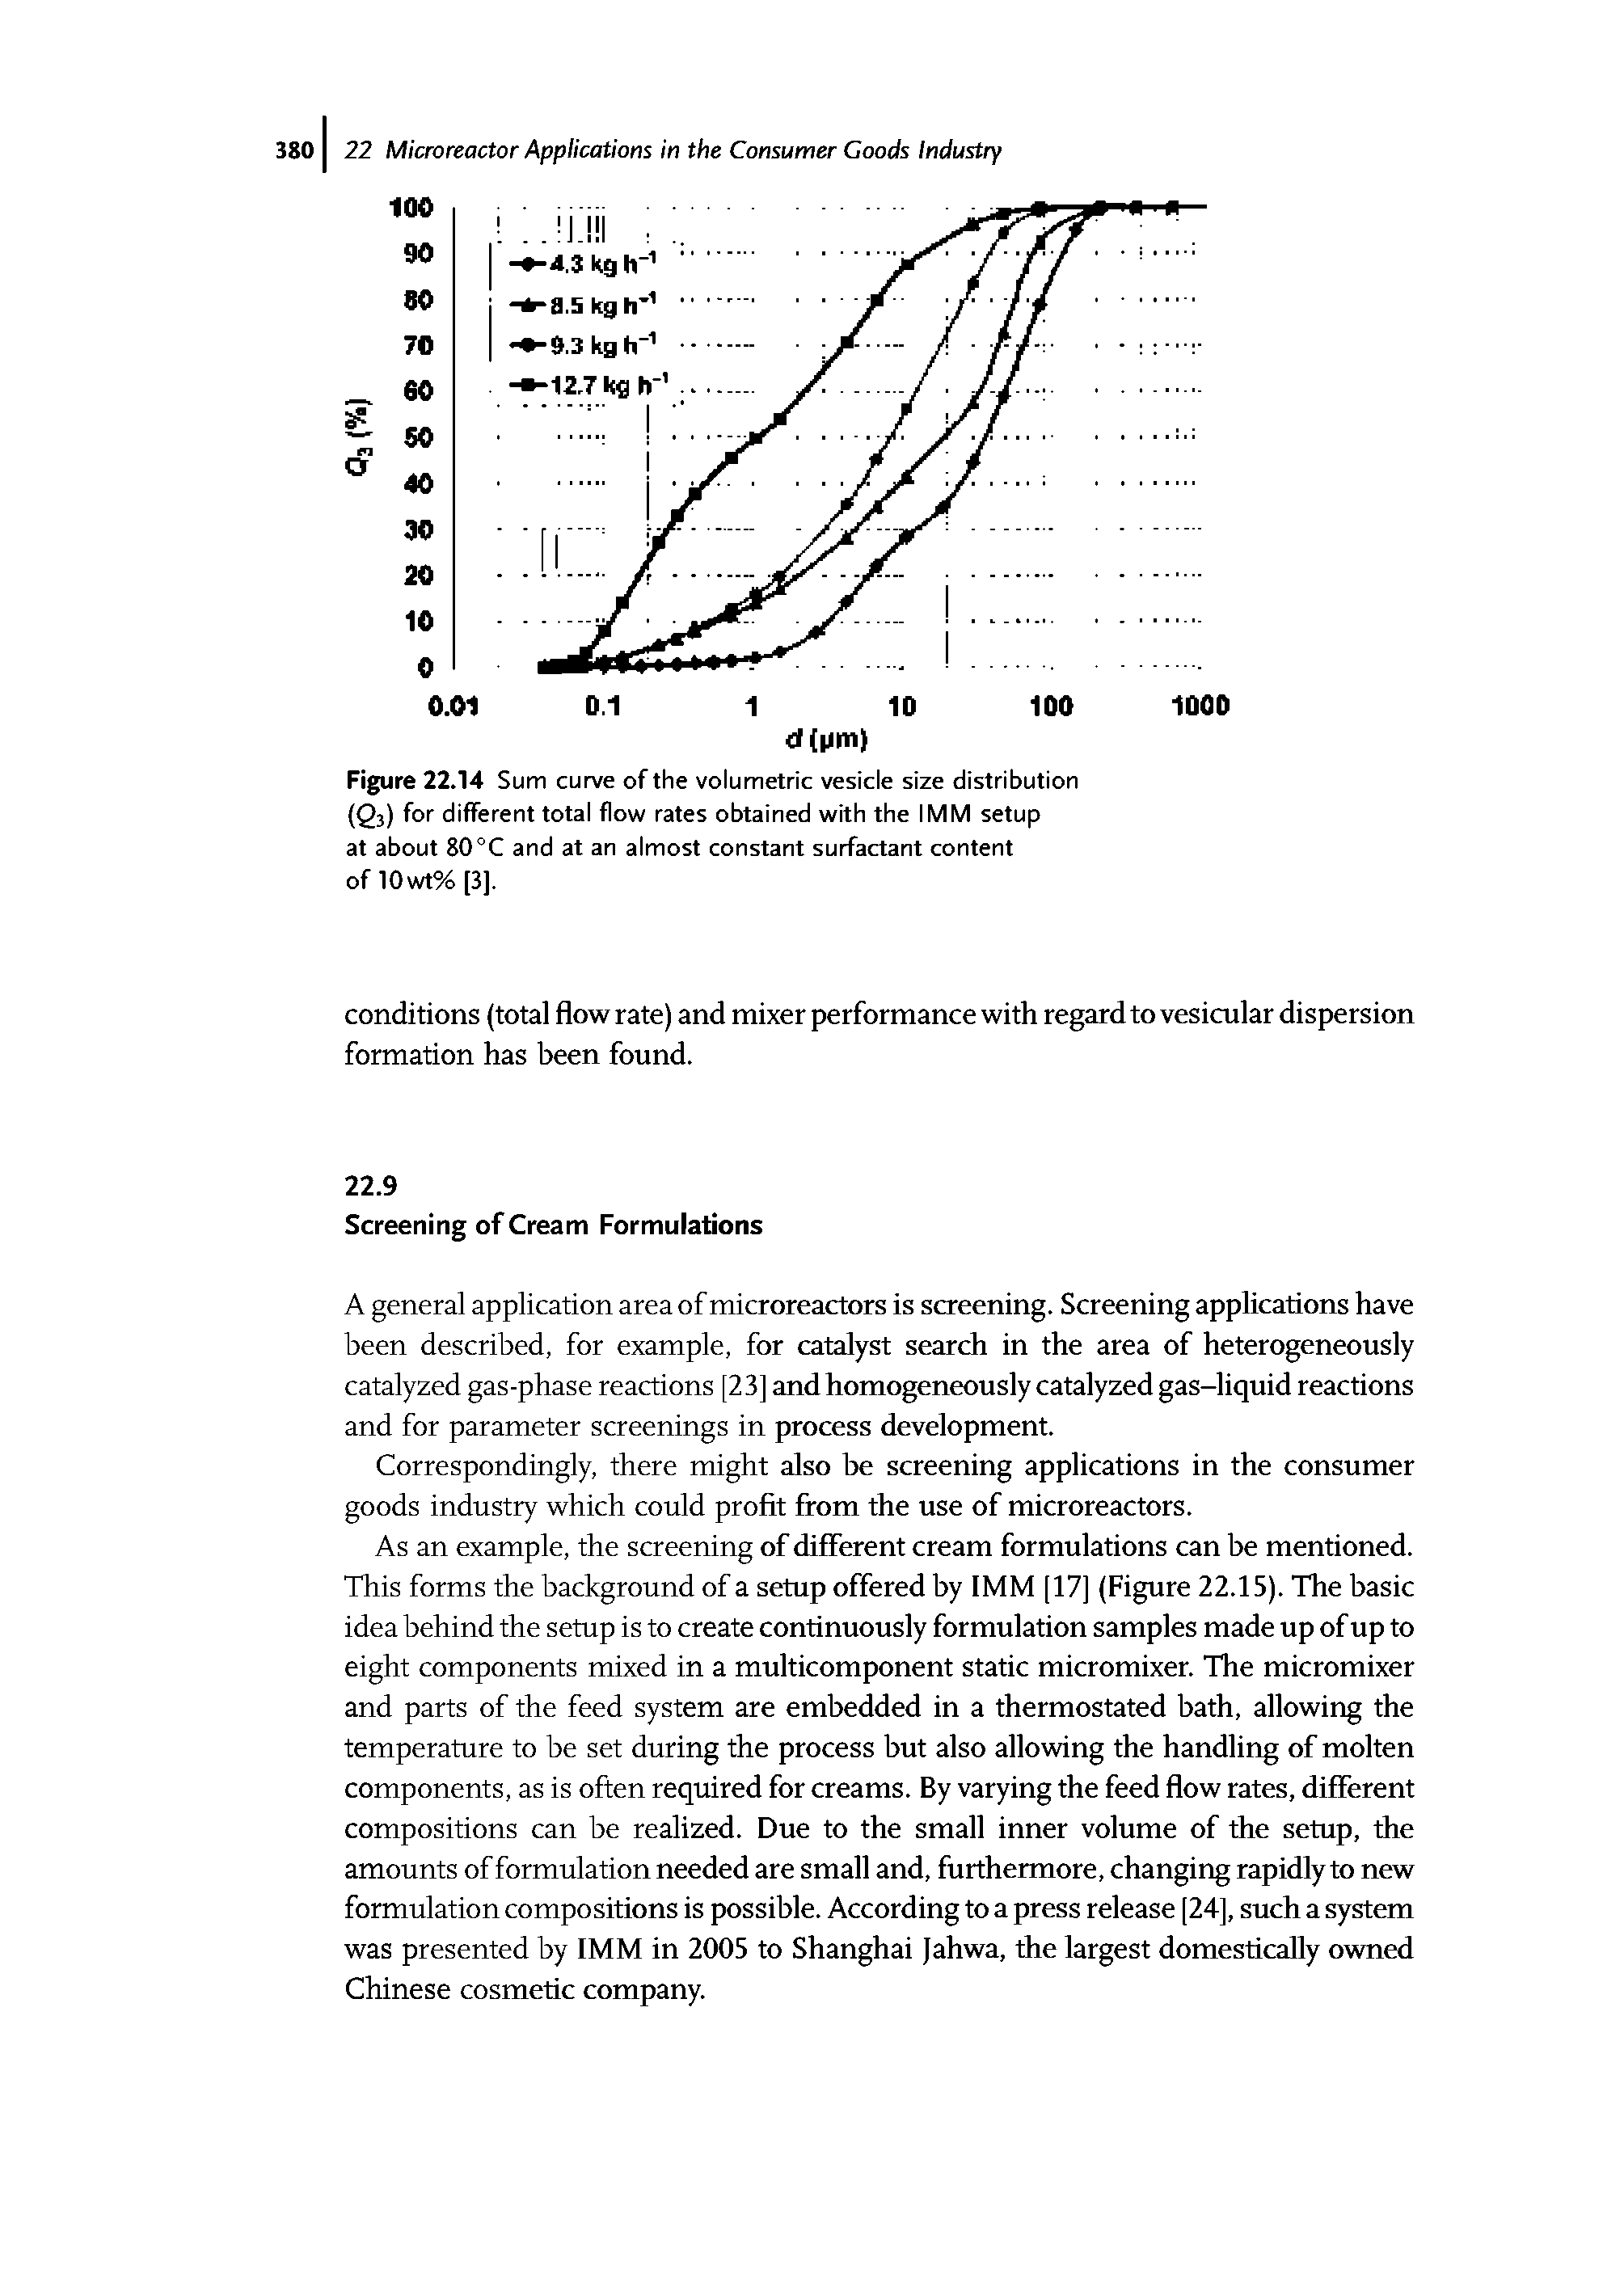 Figure 22.14 Sum curve of the volumetric vesicle size distribution (23) for different total flow rates obtained with the IMM setup at about 80°C and at an almost constant surfactant content of 10wt% [3],...